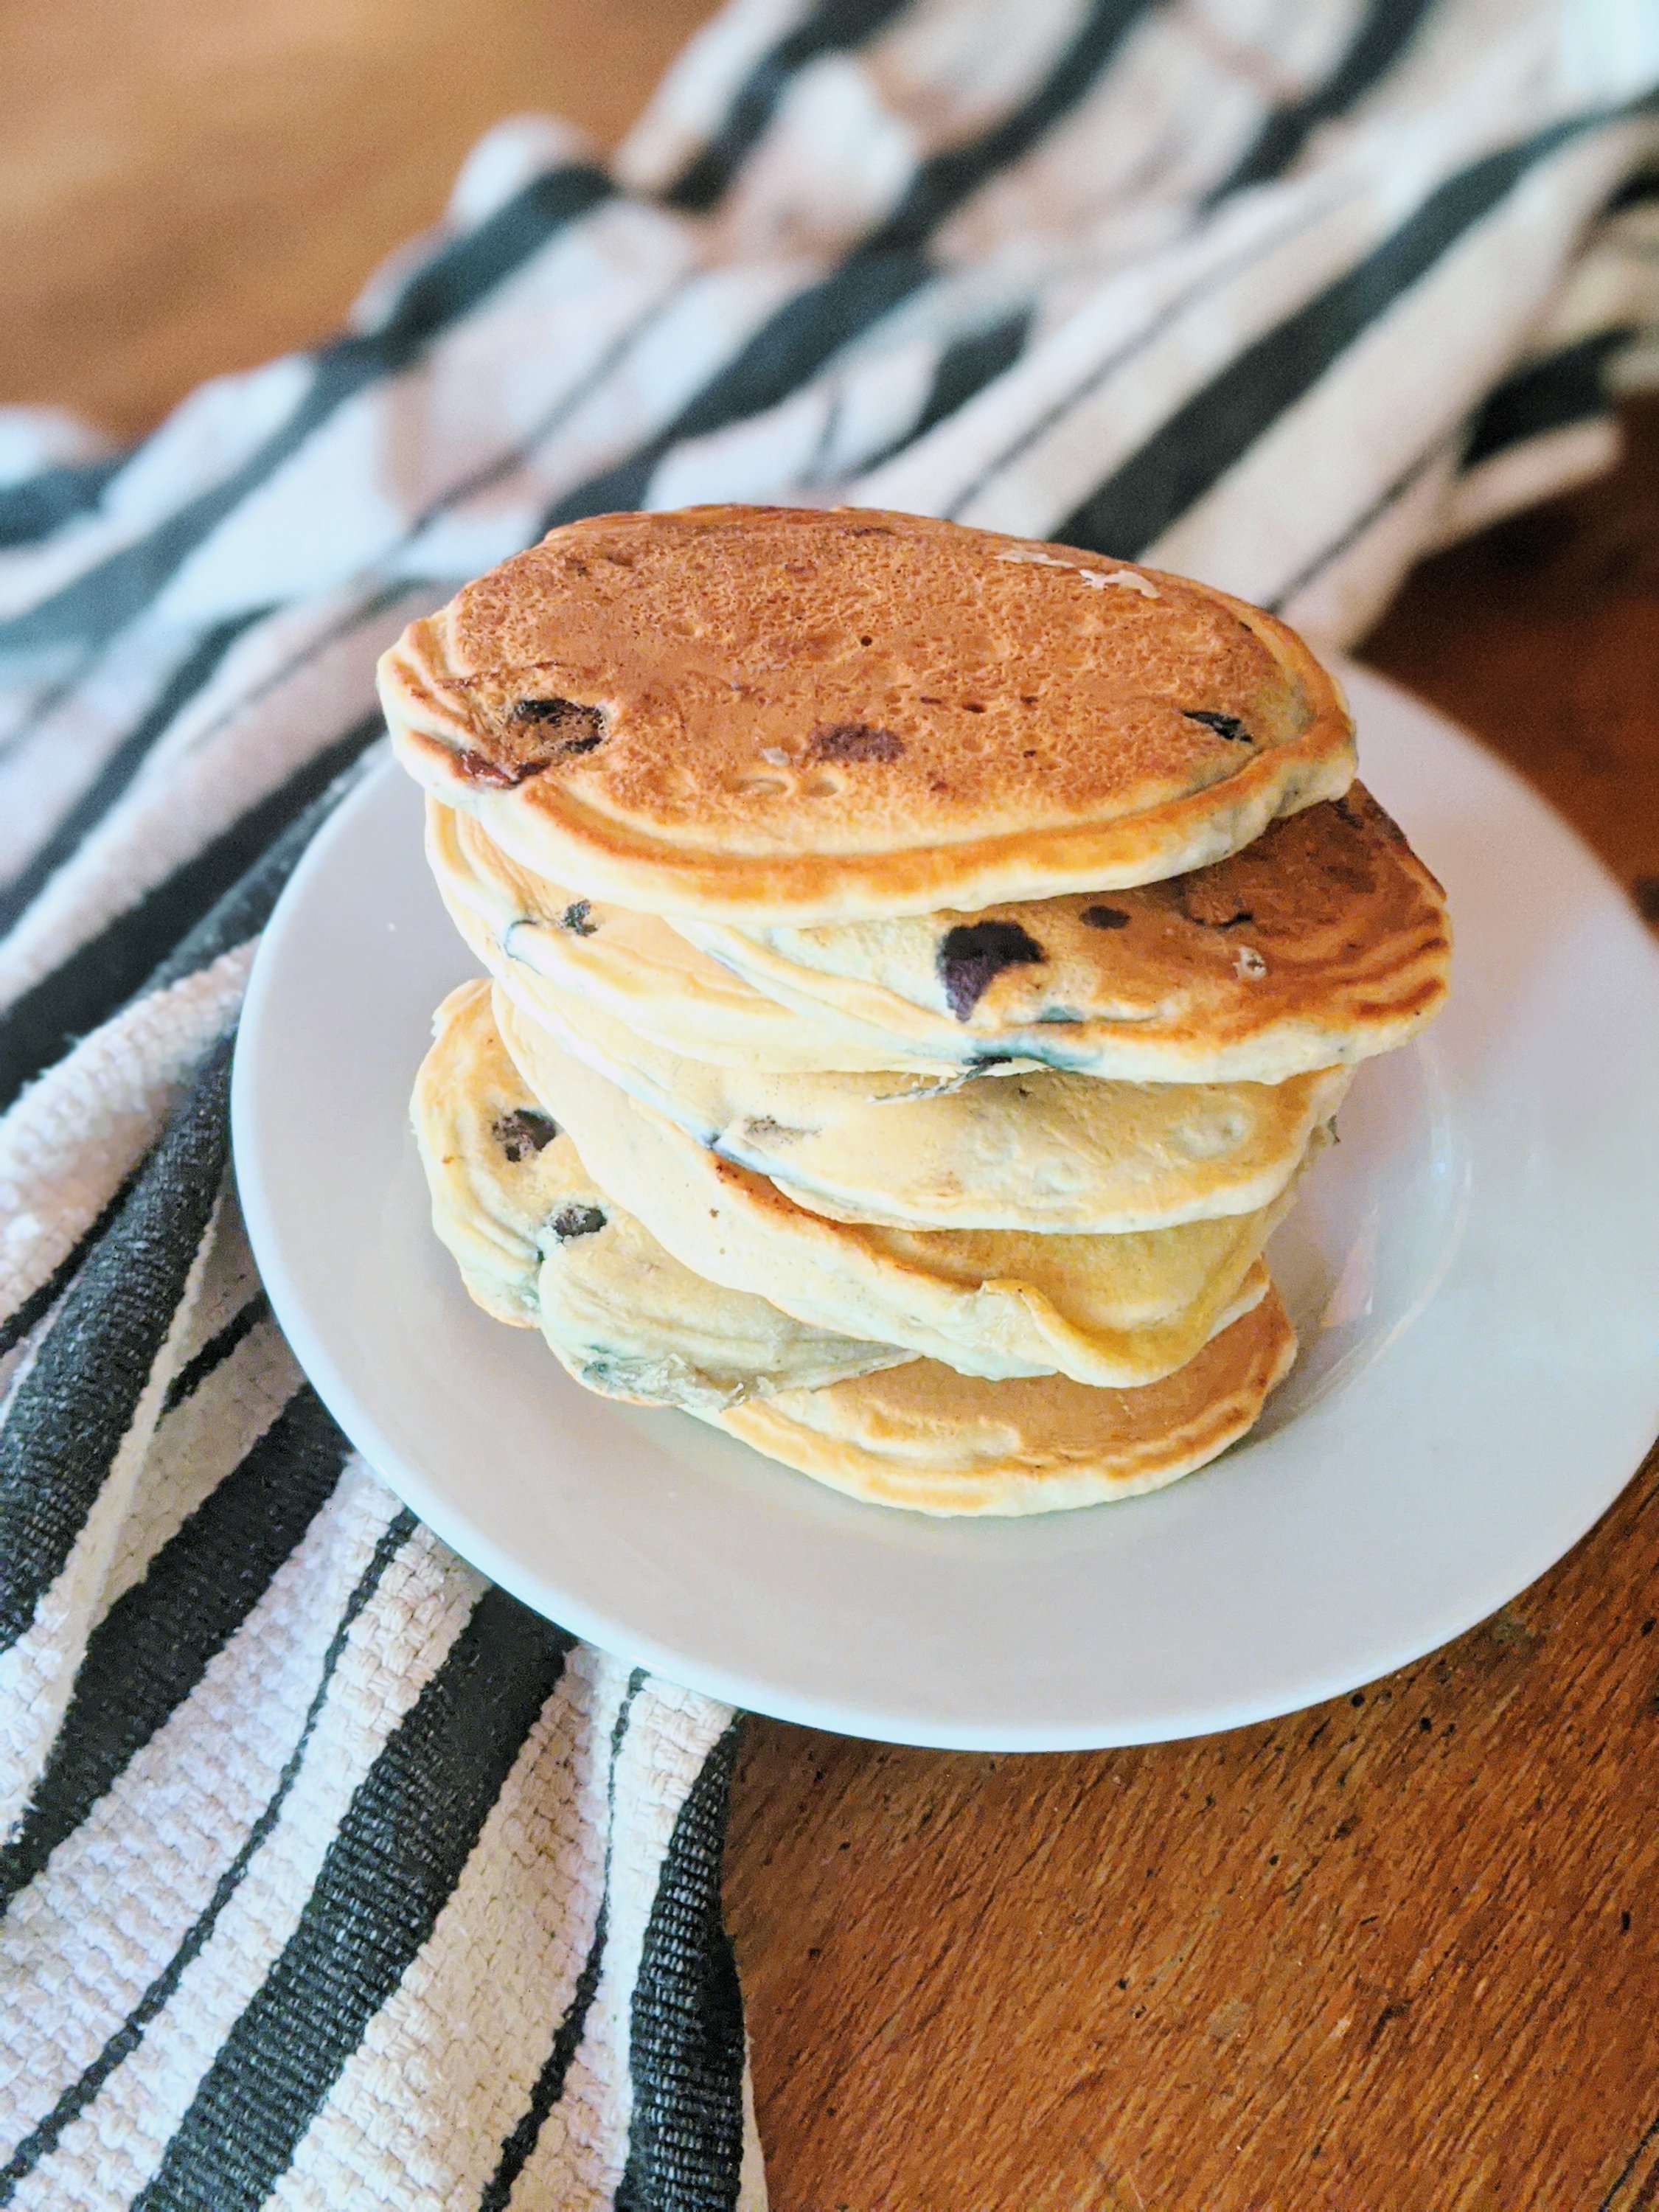 blueberry panckes with buttermilk recipe fresh or powdered buttermilk simple recipes healthy homamde brnch recipes that will impress family friends kids